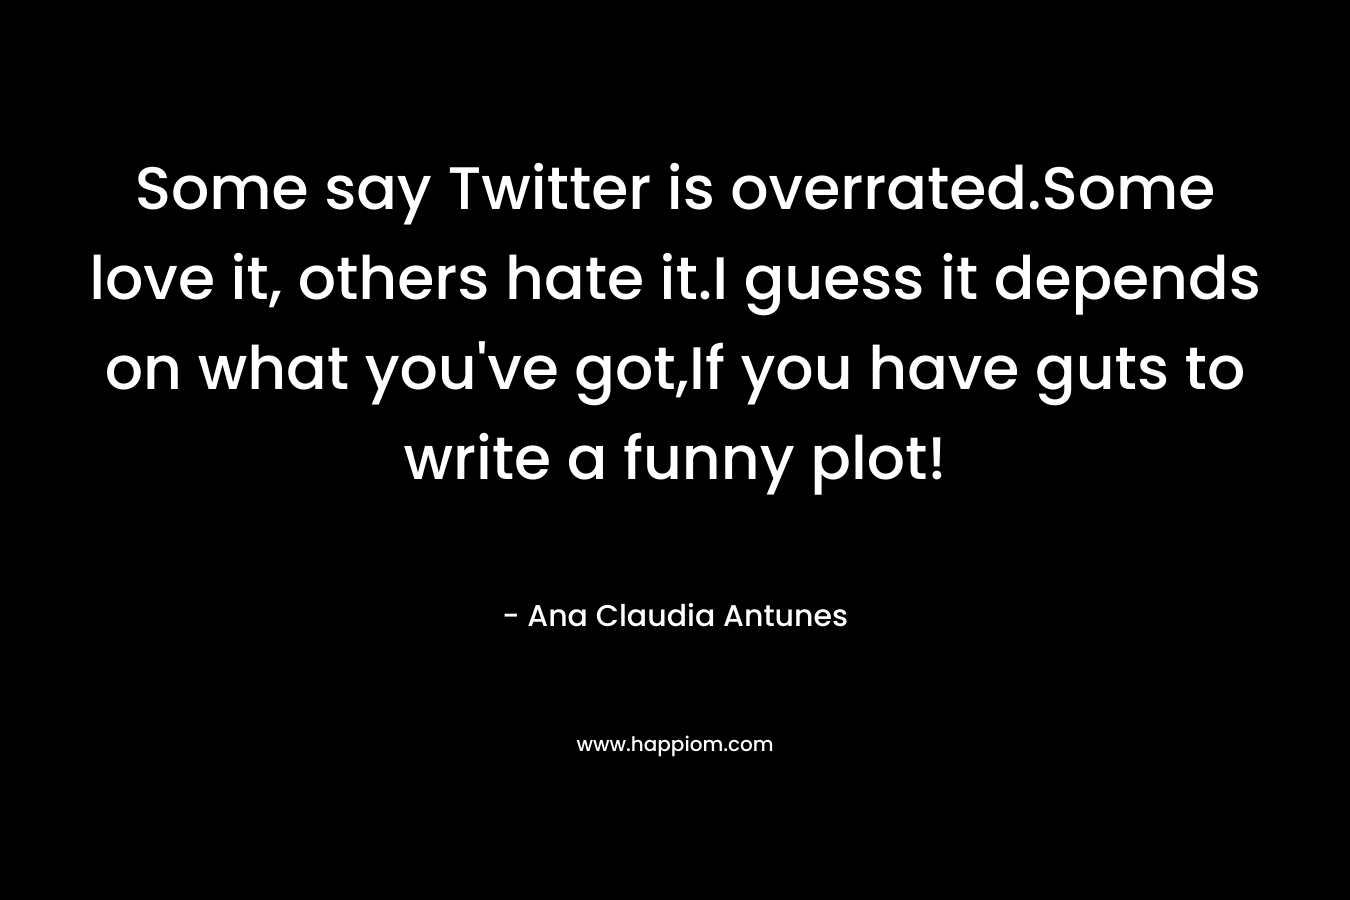 Some say Twitter is overrated.Some love it, others hate it.I guess it depends on what you’ve got,If you have guts to write a funny plot! – Ana Claudia Antunes